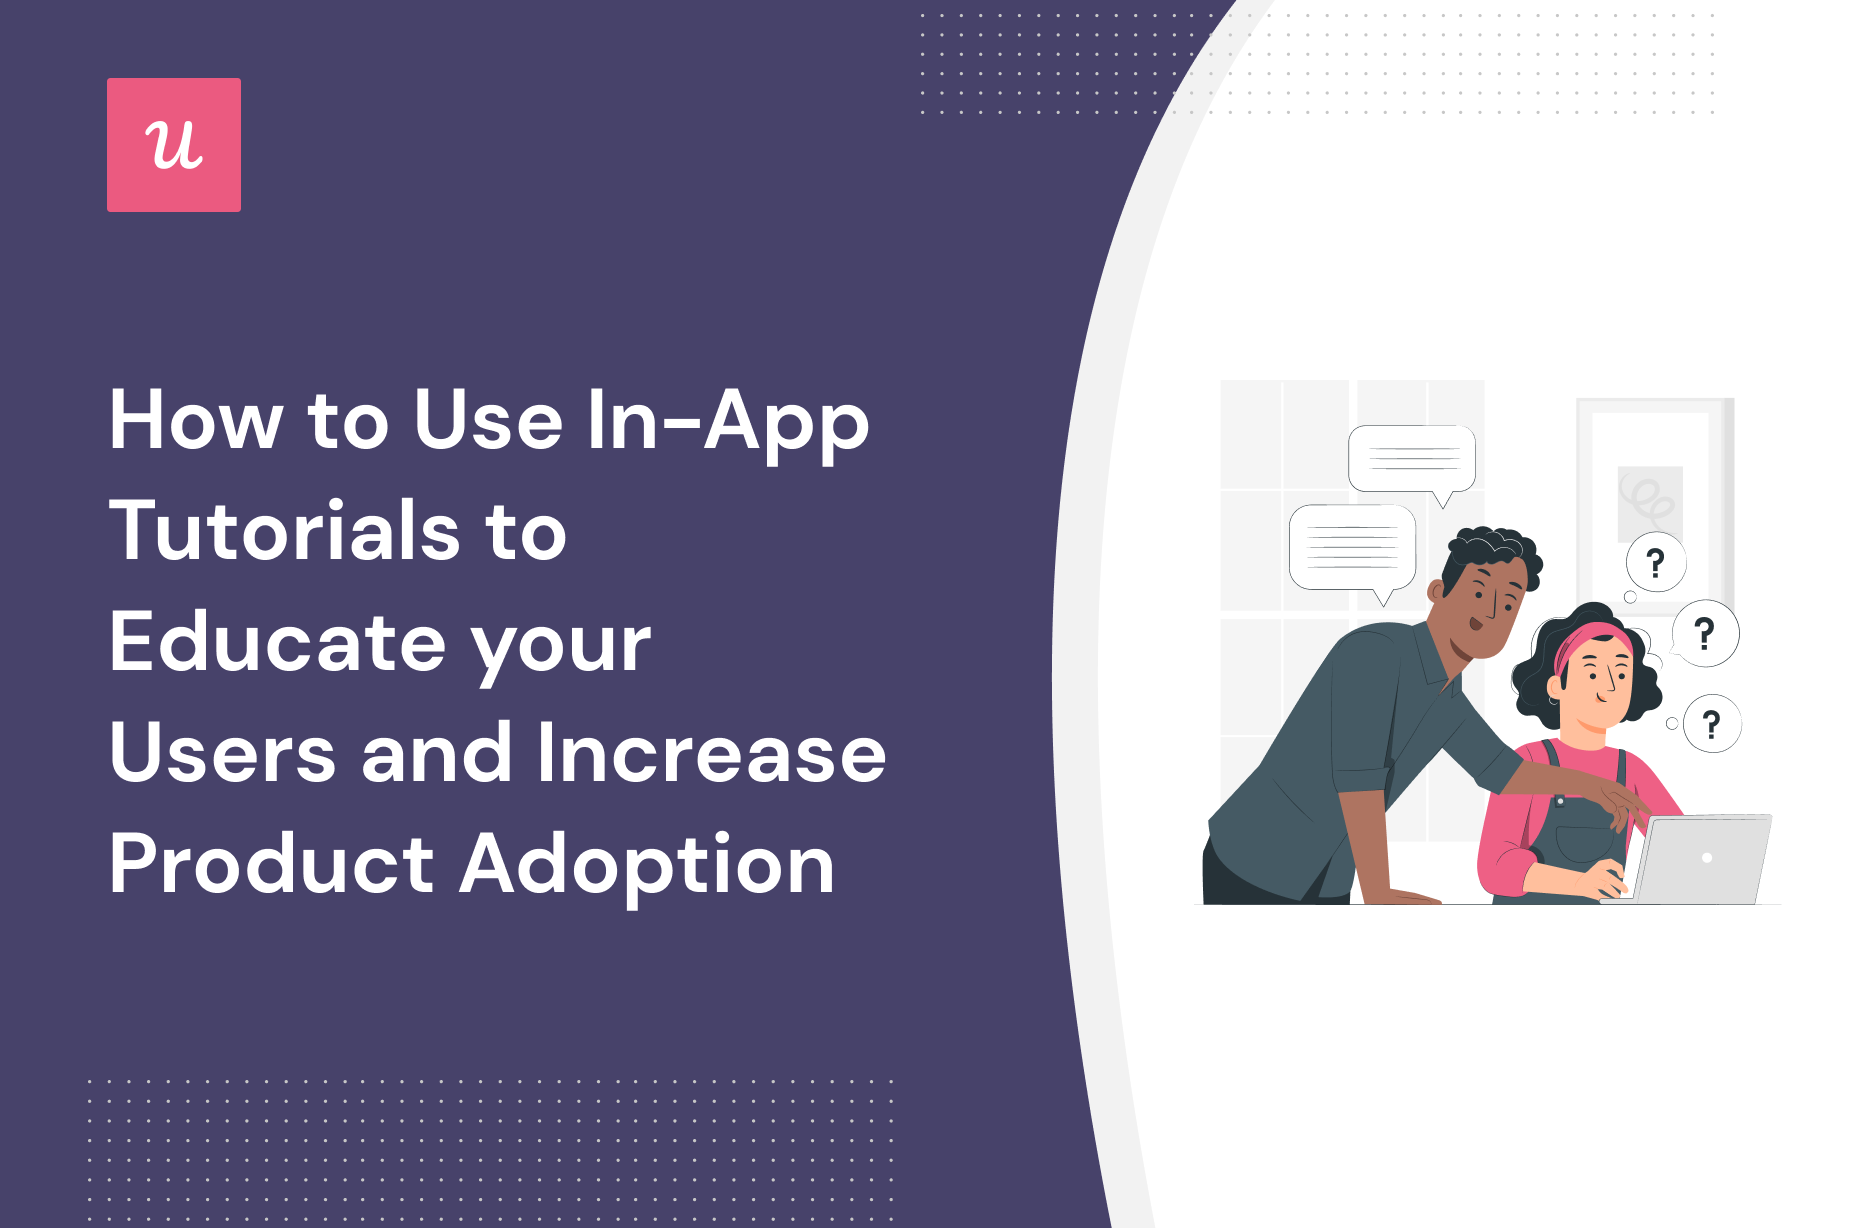 How to Use In-App Tutorials to Educate your Users and Increase Product Adoption